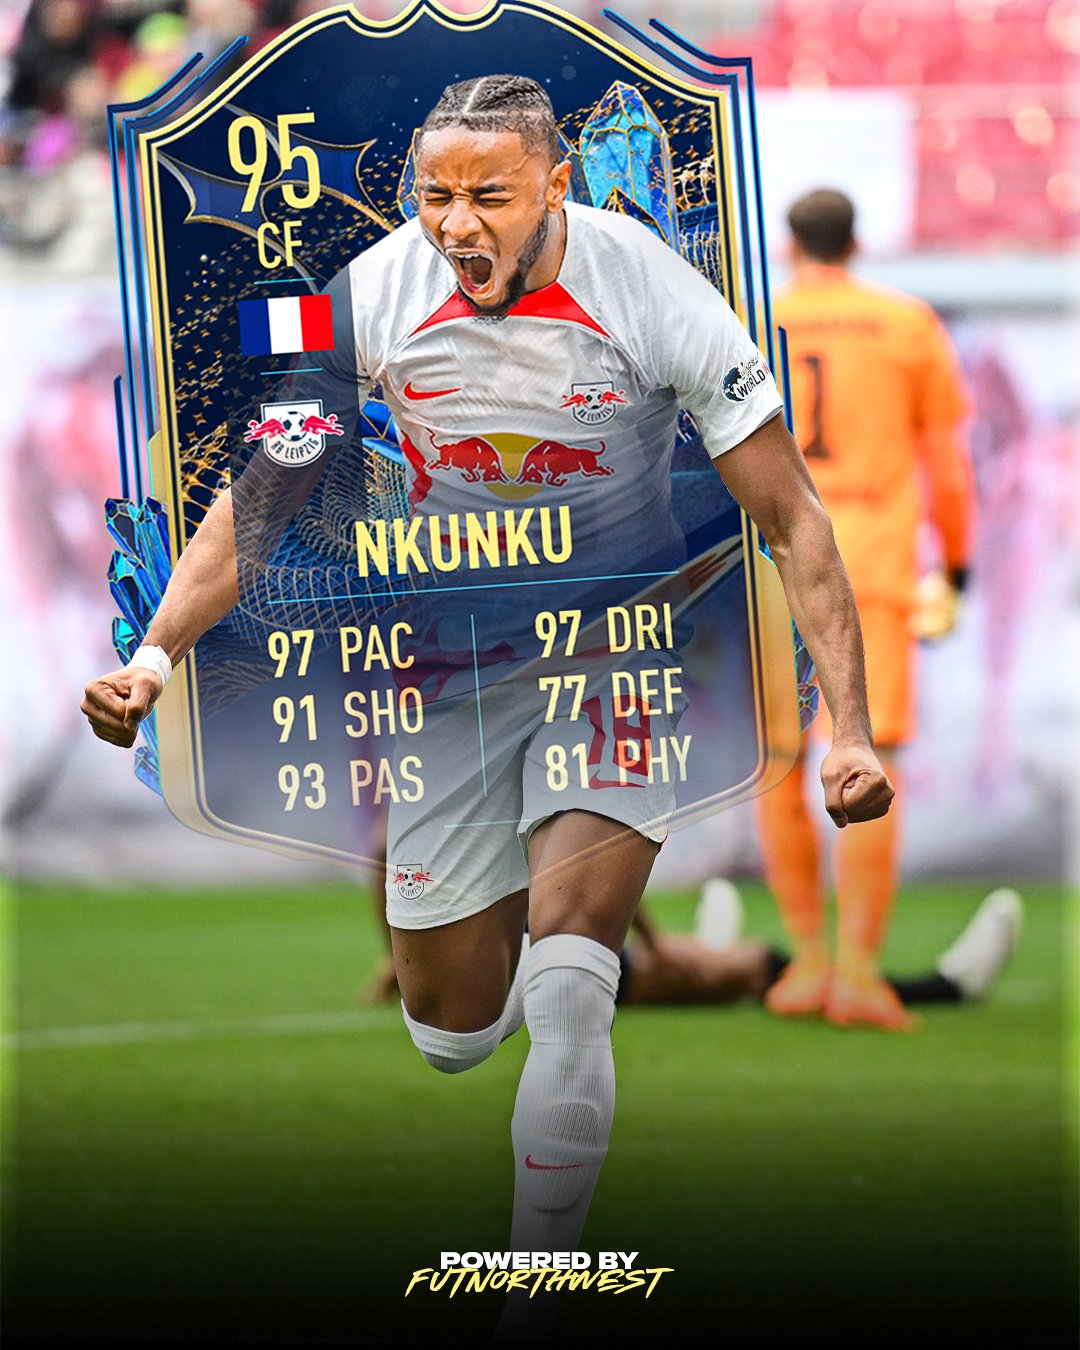 ANOTHER NKUNKU SBC FOR TOTS😳⁉️ credit to: fut sheriff, donk